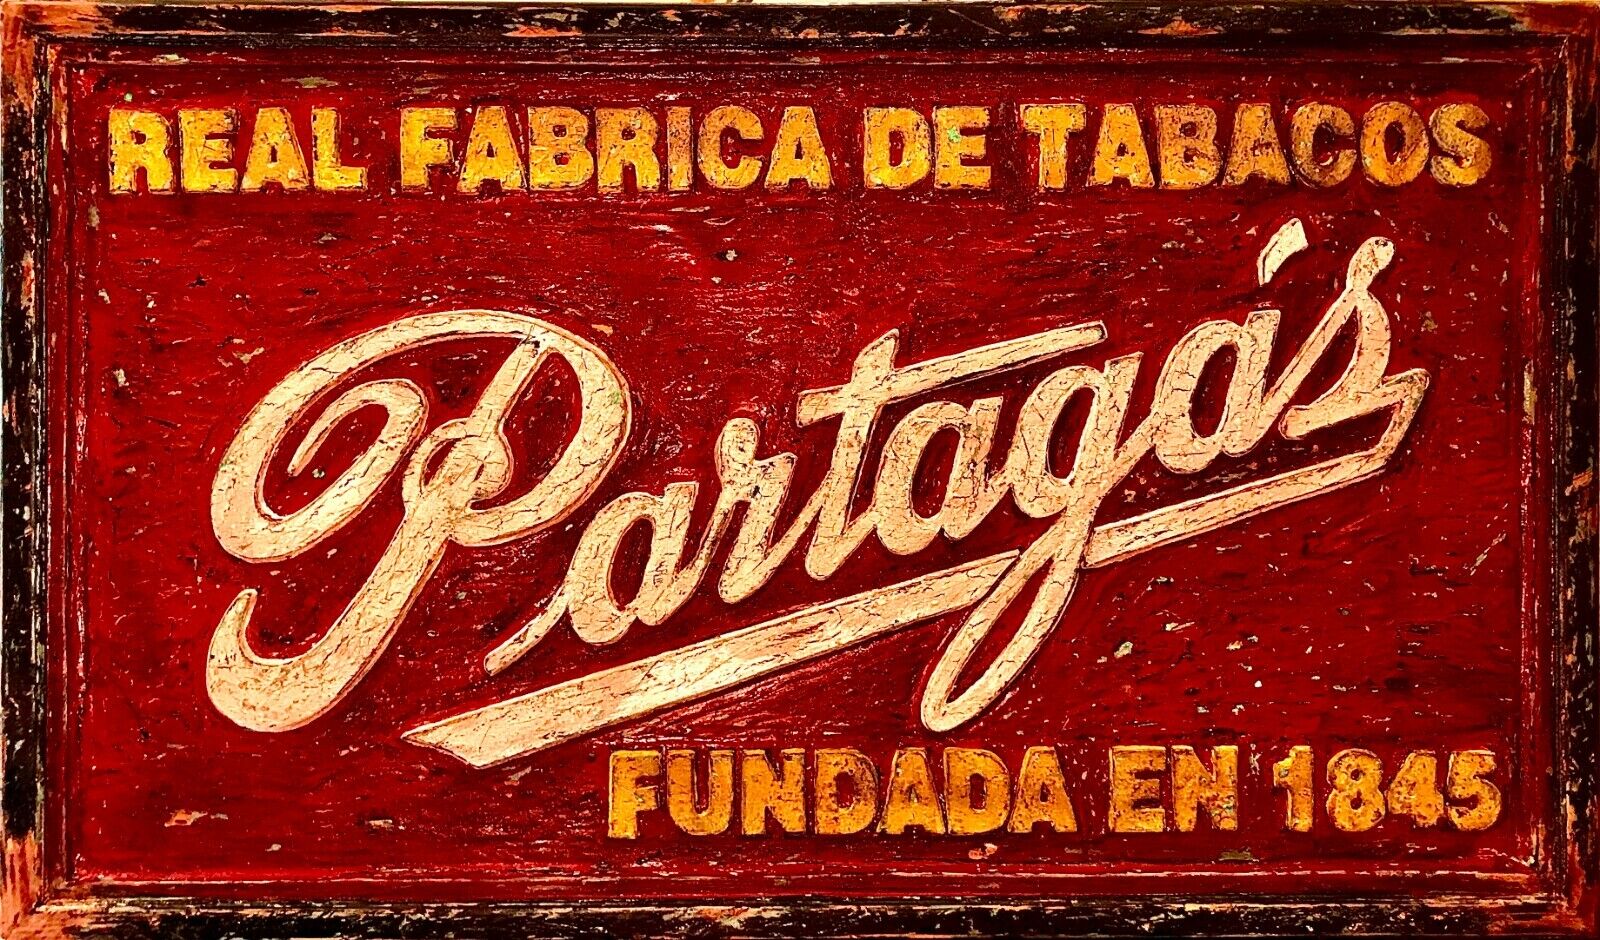 Old Partagas Cigar Factory Sign Print Poster, 22 x 14, Printed in USA